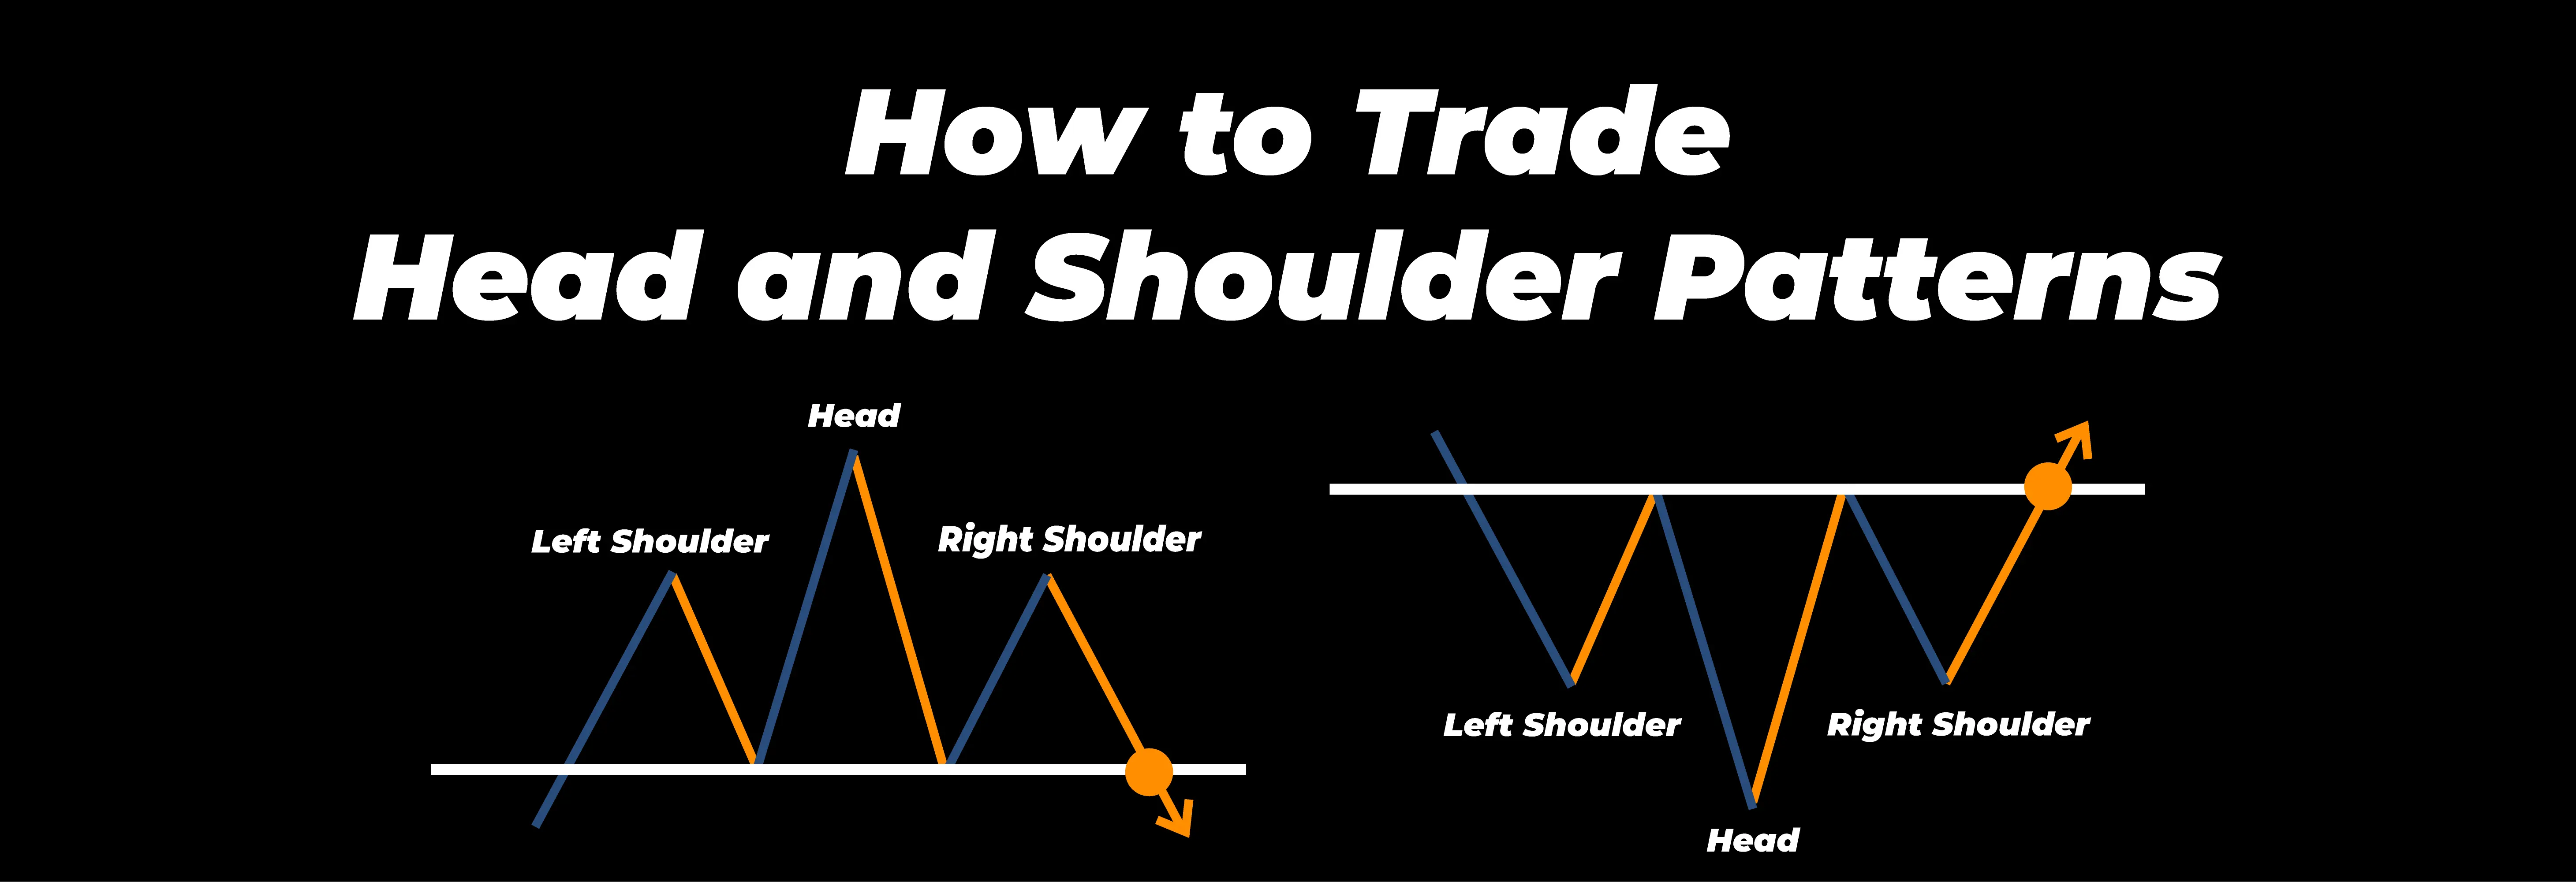 How to Trade Head and Shoulder Patterns